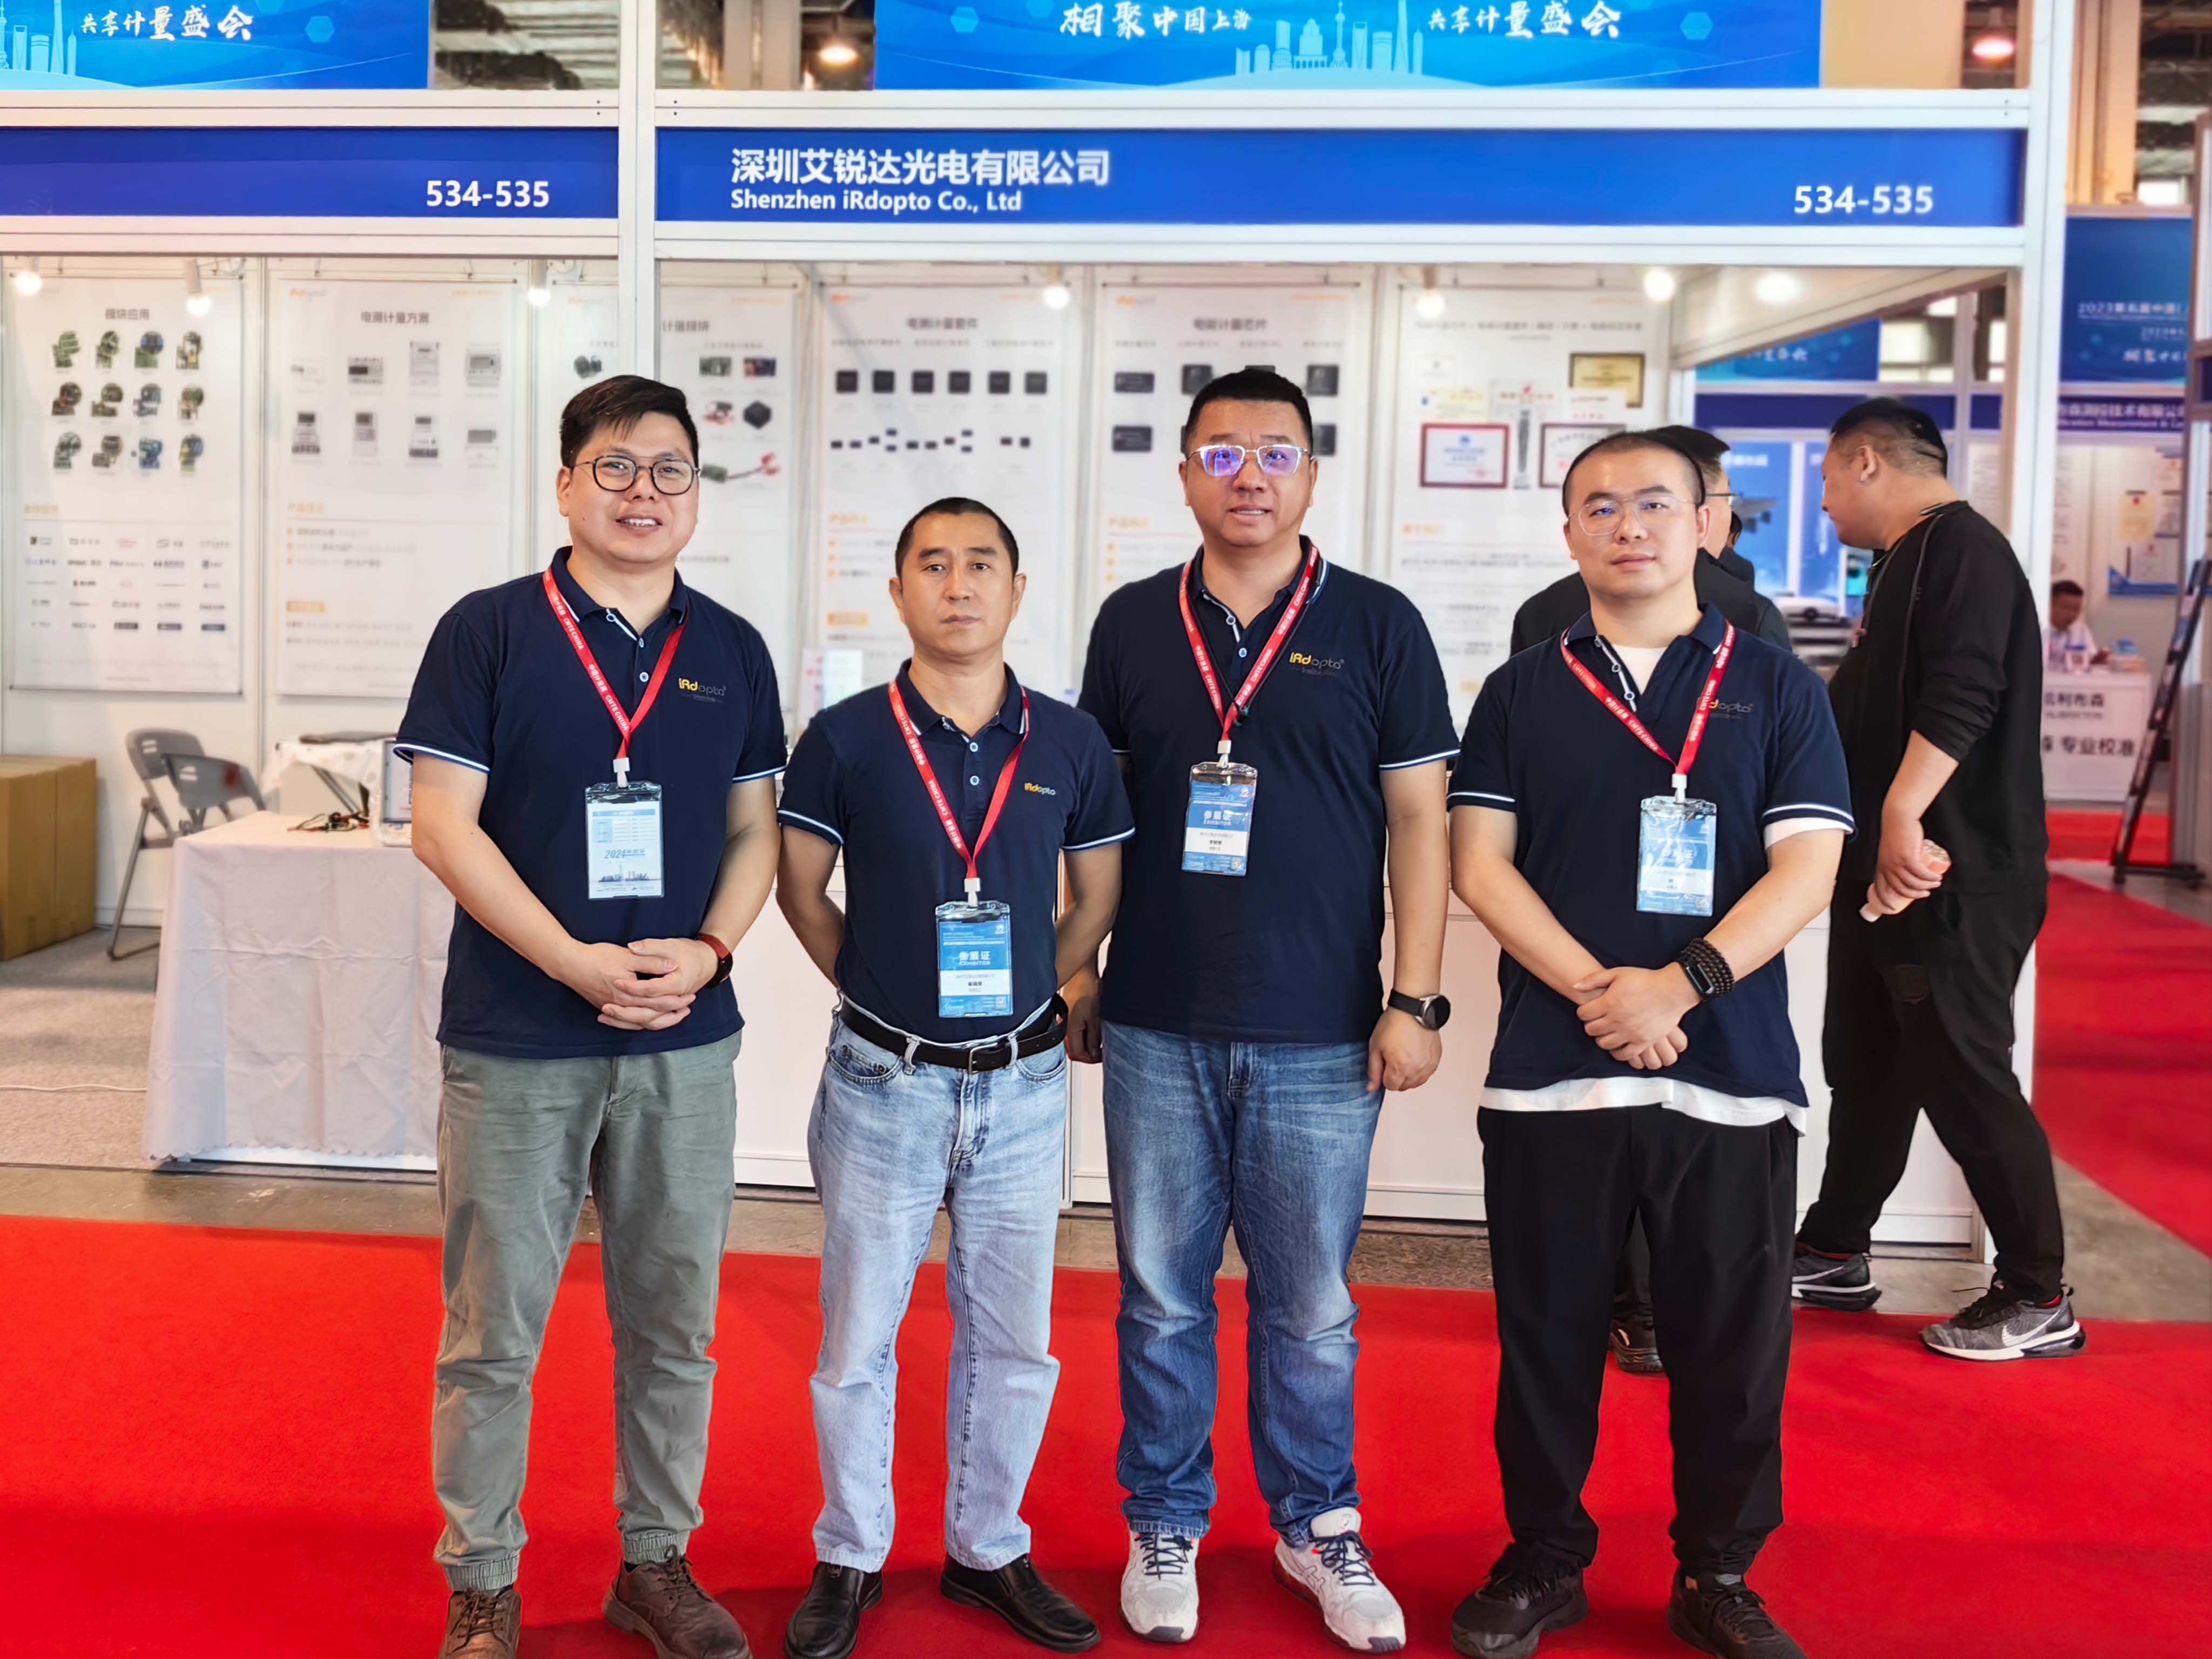 2023 Shanghai International Measurement Testing Technology and Equipment Expo Grandly Opens at the Shanghai World Expo Exhibition Center. Airida Optoe